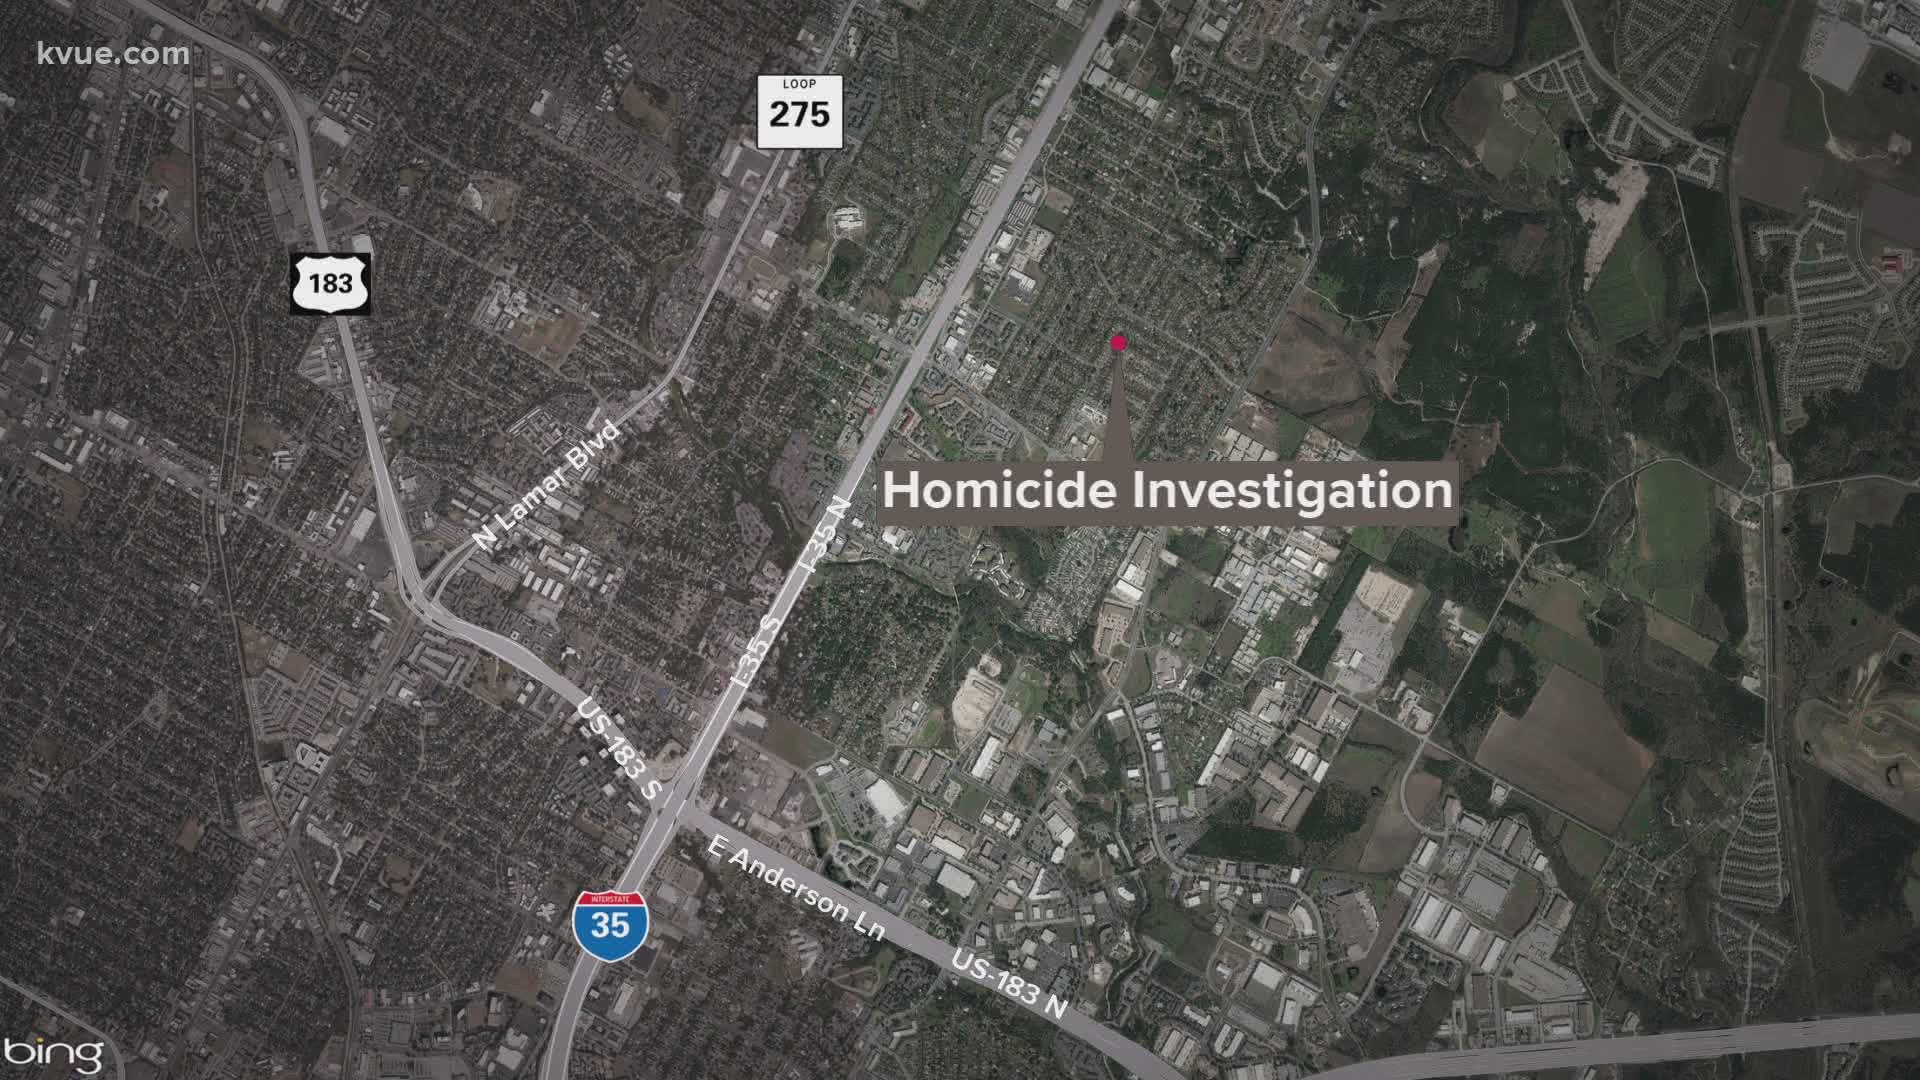 This is the 25th homicide in Austin so far this year.